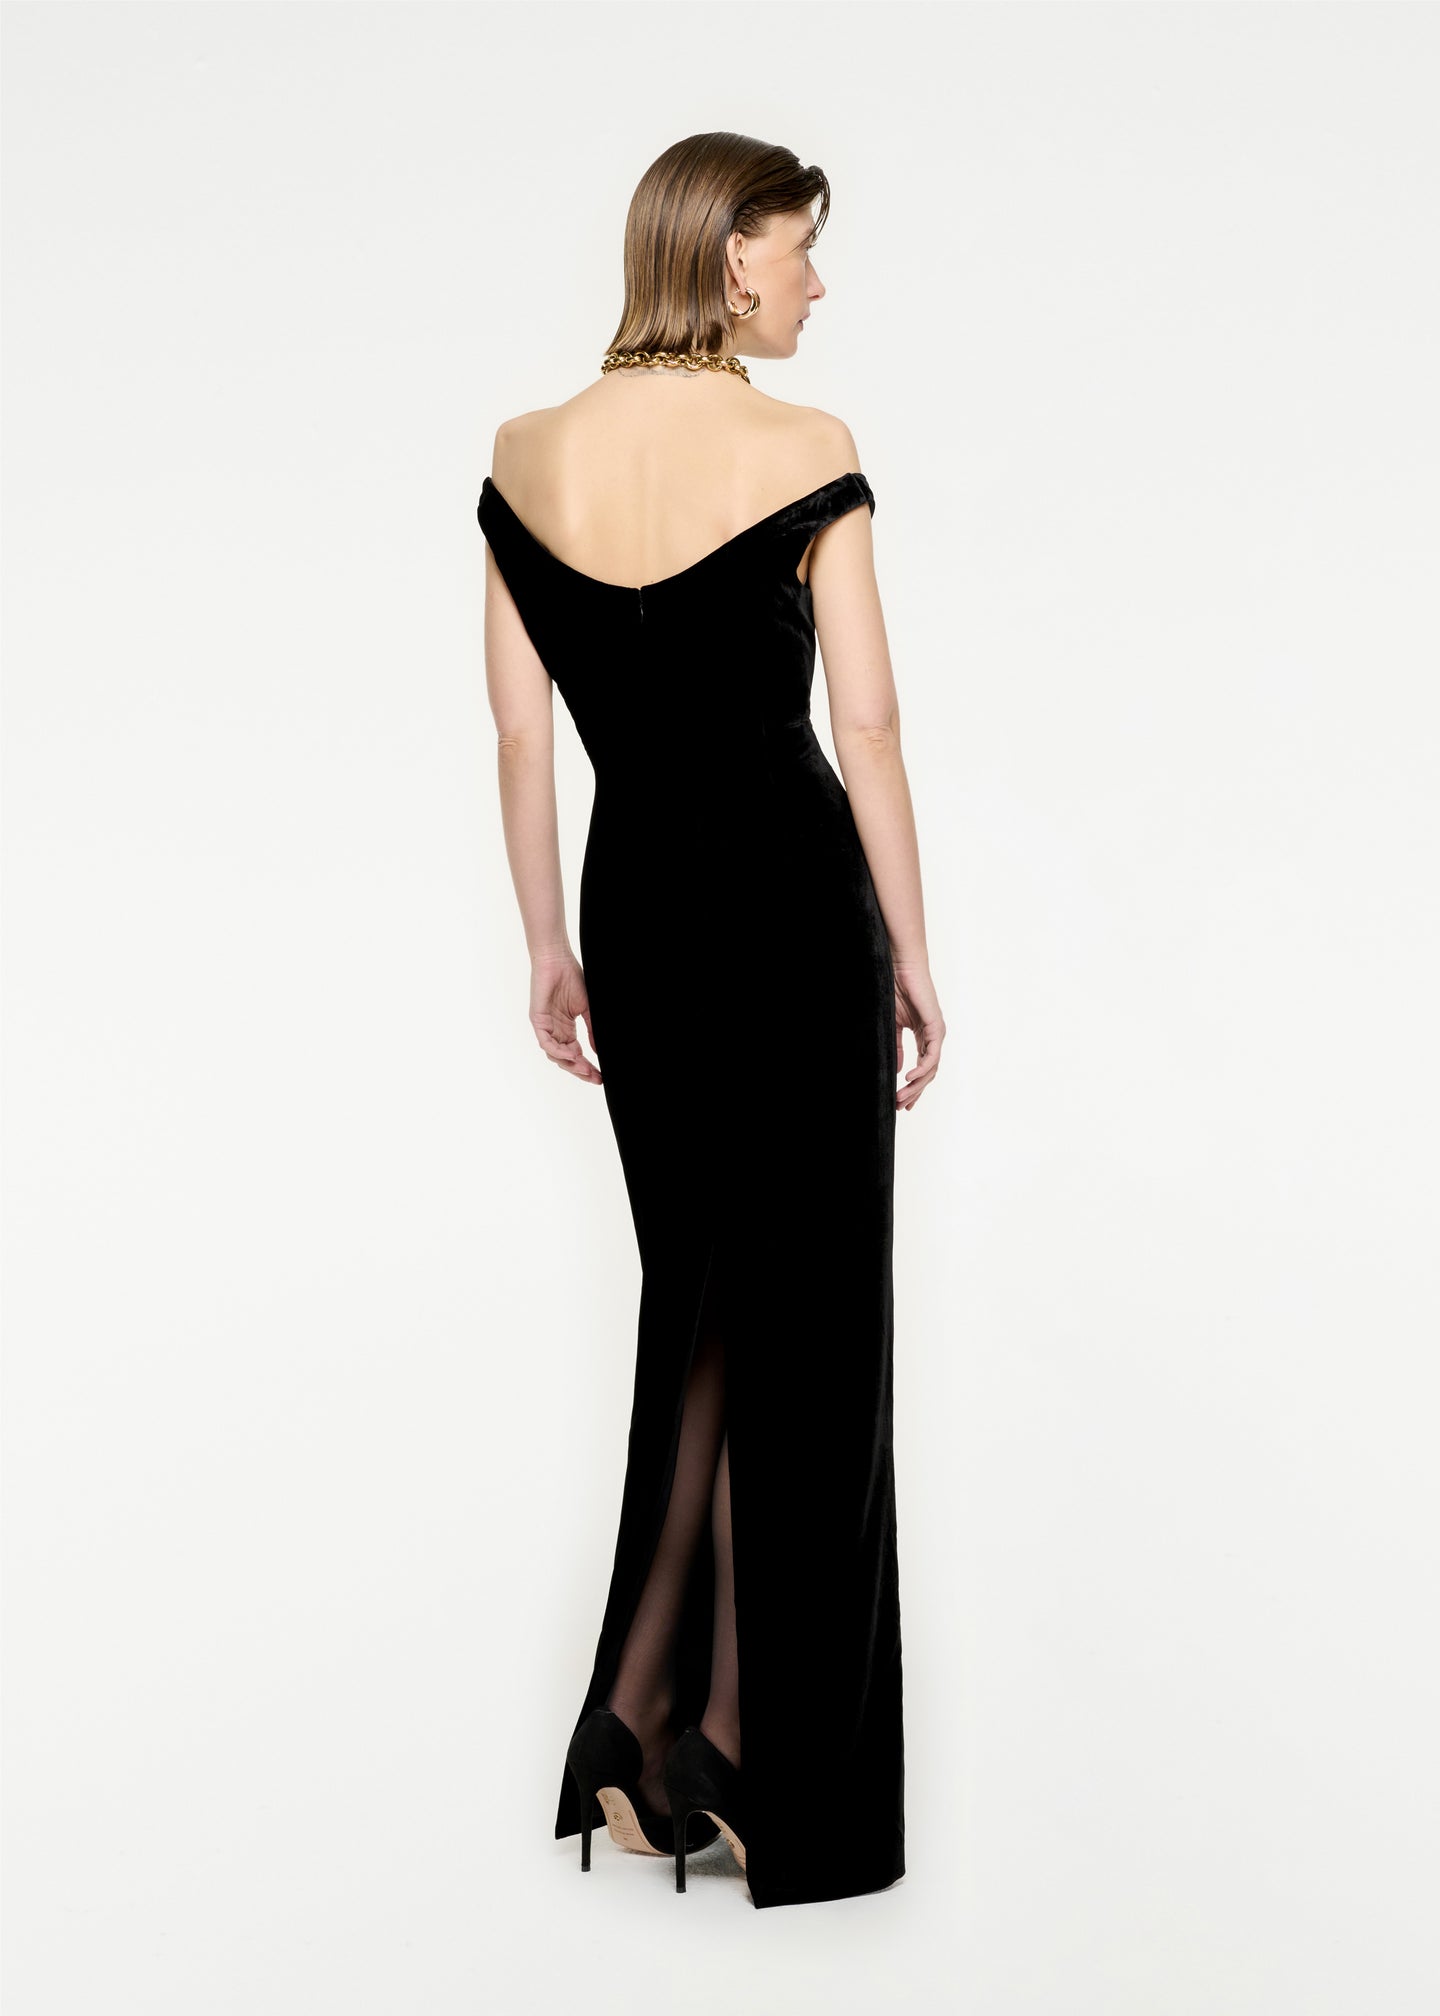 The back of a woman wearing the Off The Shoulder Velvet Maxi Dress in Black